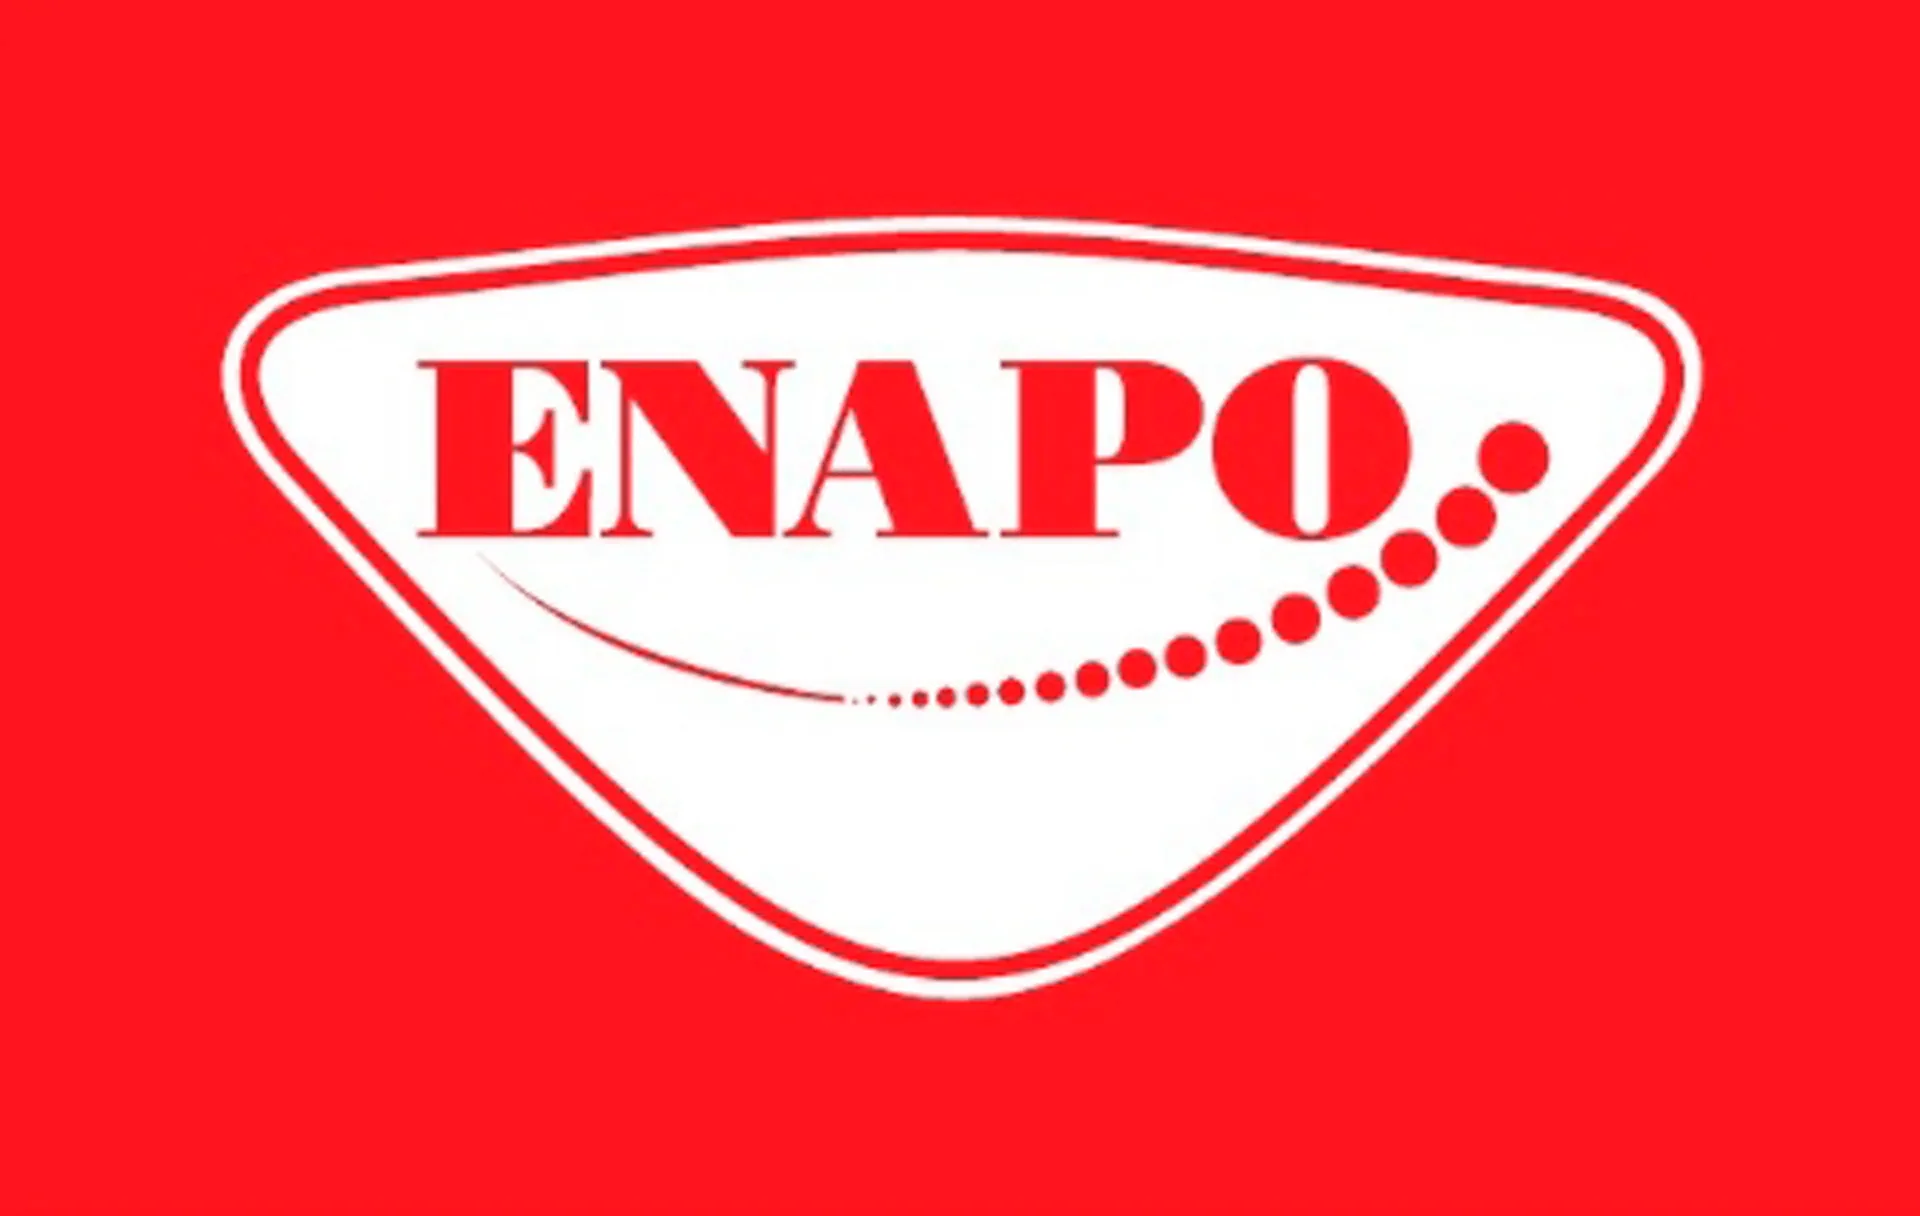 ENAPO logo of current catalogue